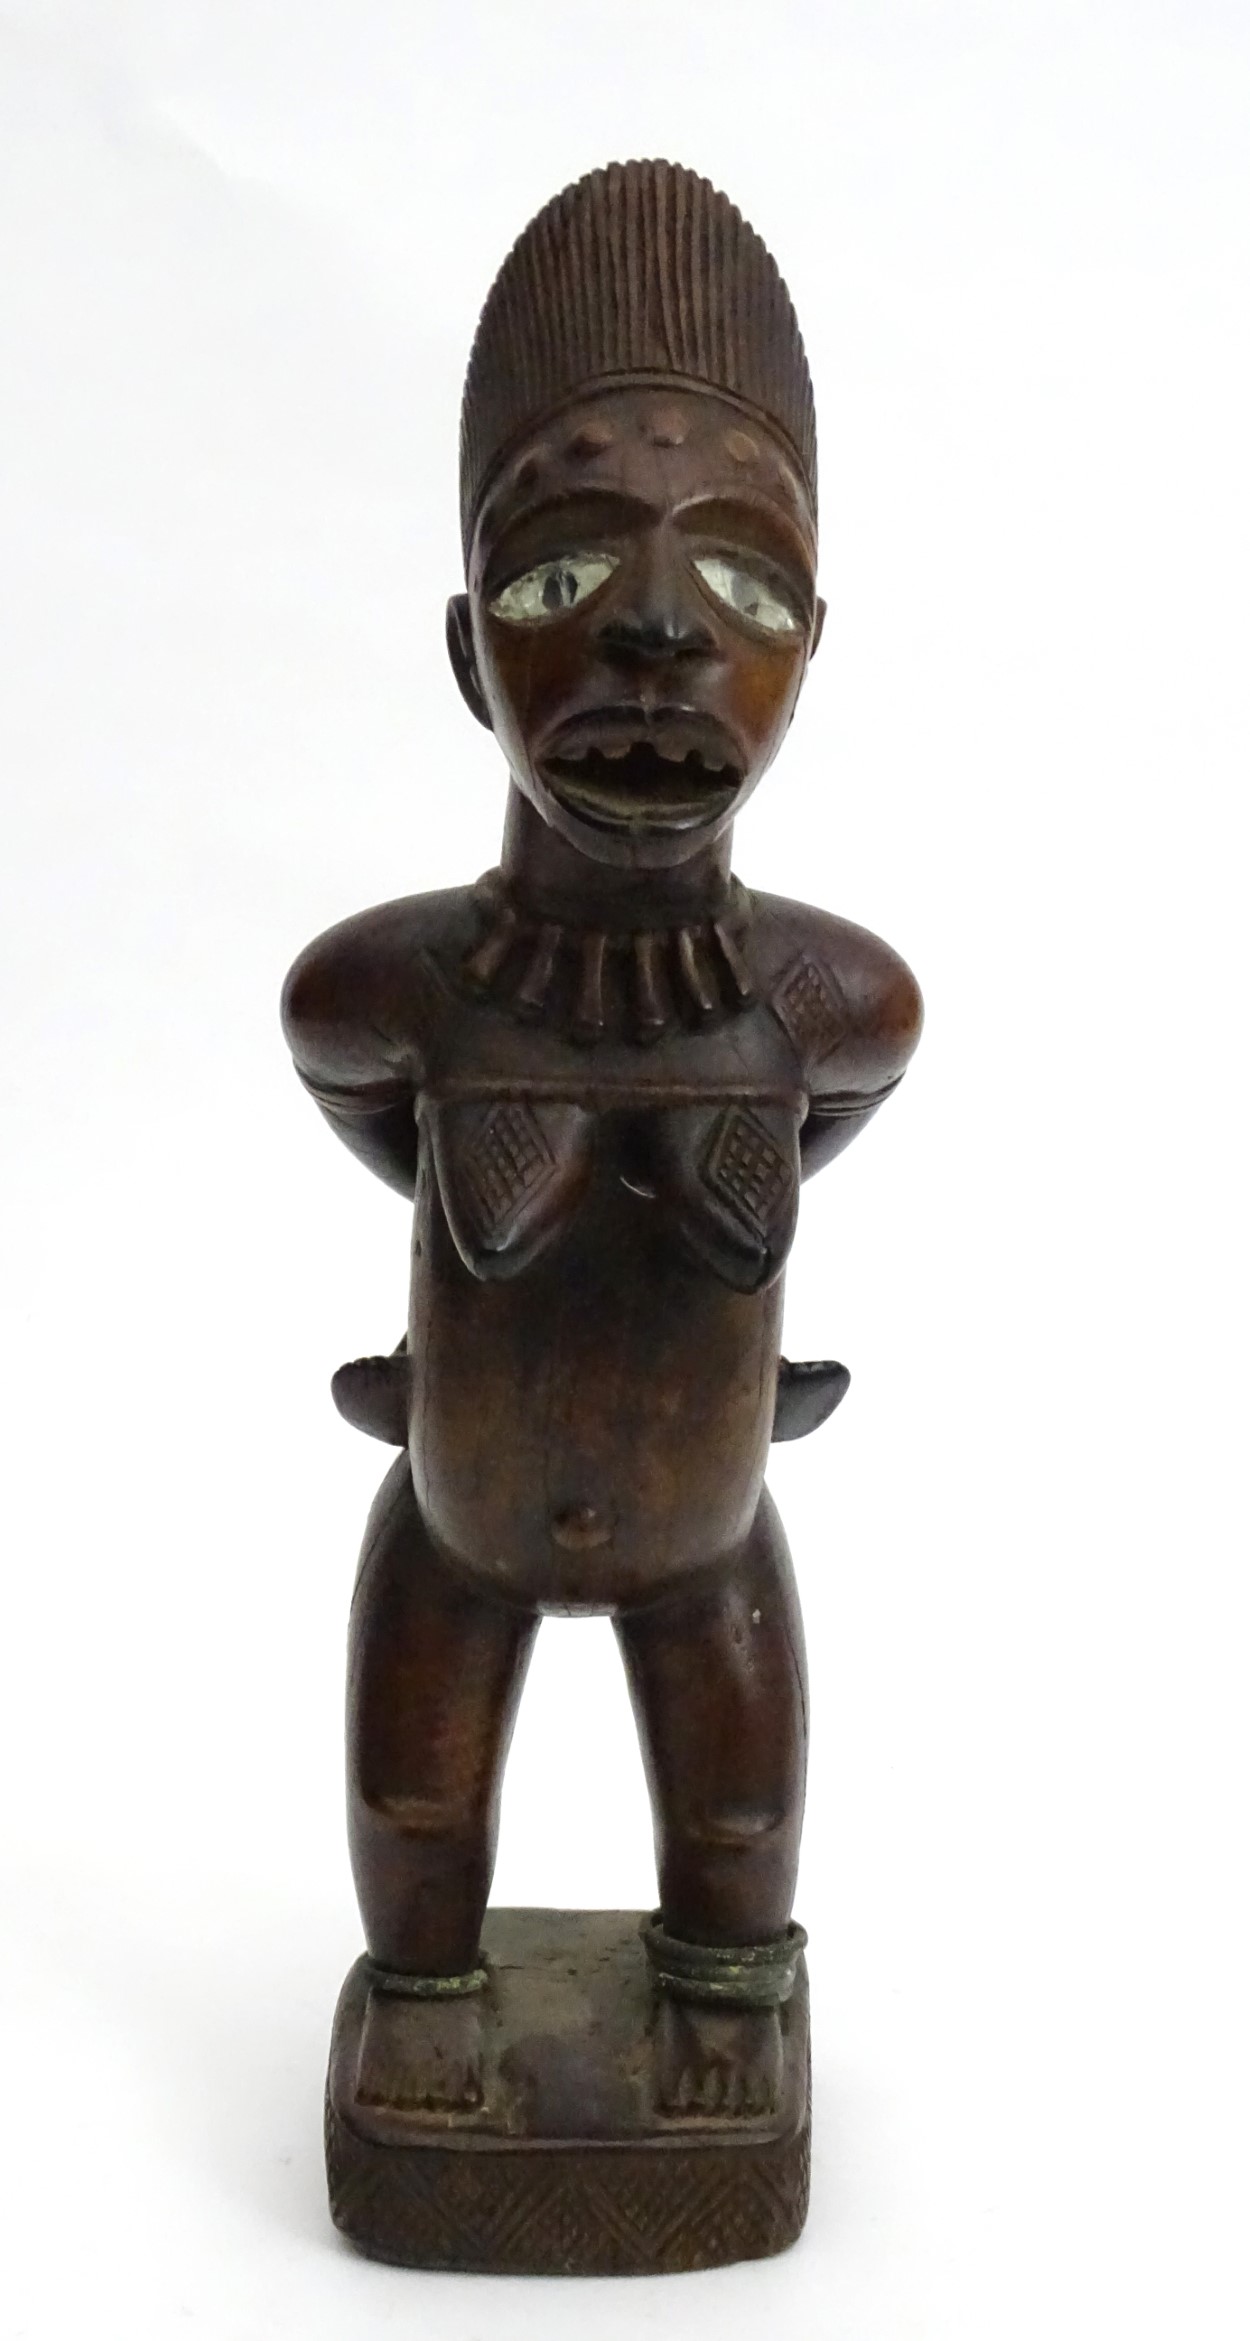 Tribal : An Ethnographic Native Tribal Kongo maternity figure. Approx. 18 1/2" high. - Image 5 of 11